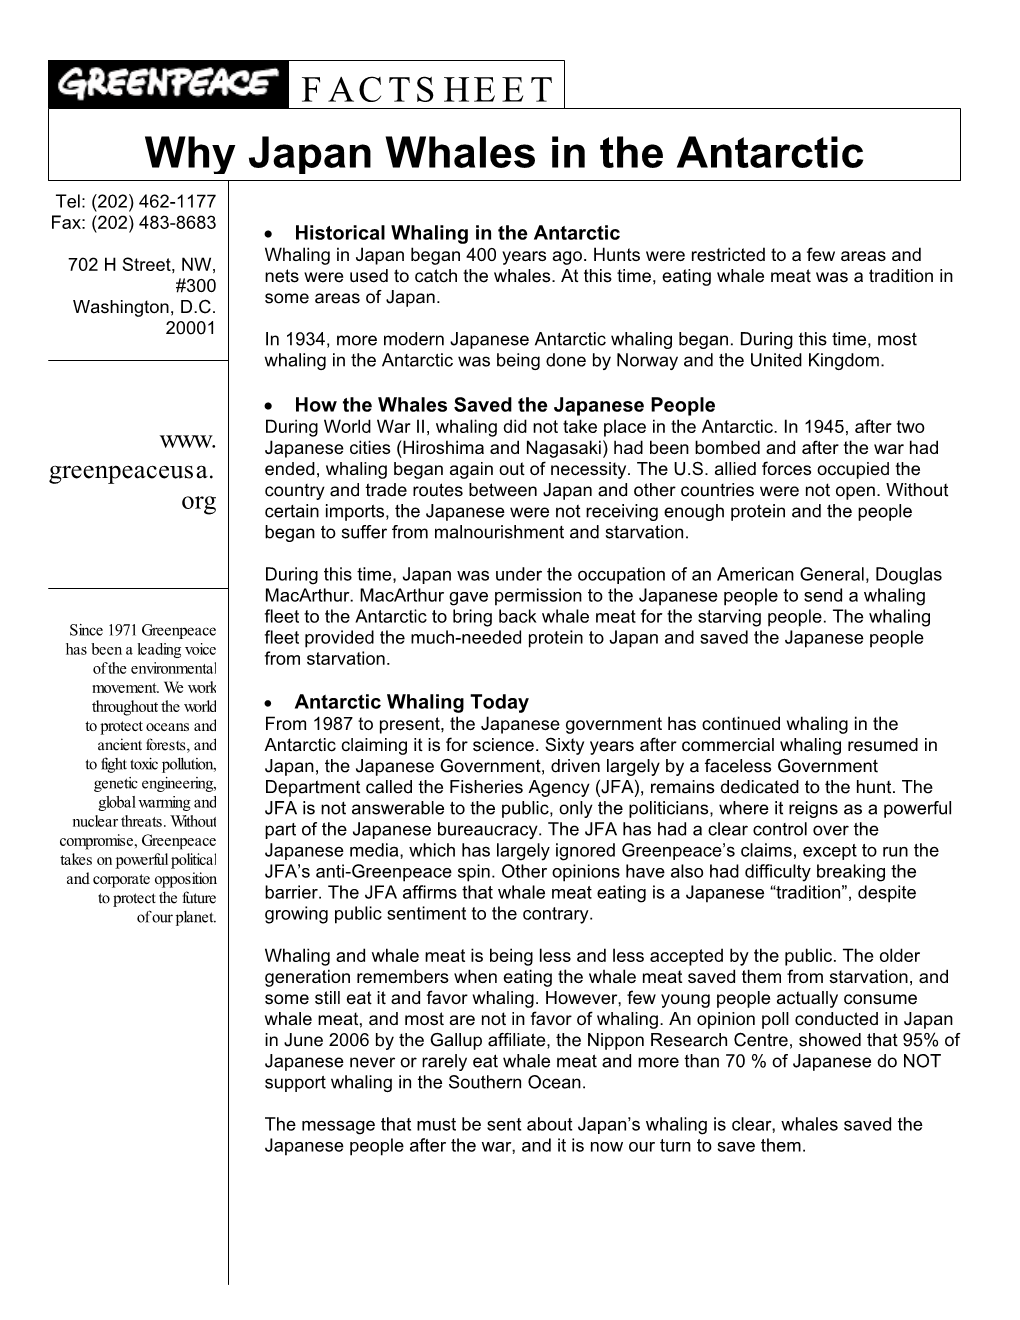 Why Japan Whales in the Antarctic Tel: (202) 462-1177 Fax: (202) 483-8683 • Historical Whaling in the Antarctic Whaling in Japan Began 400 Years Ago